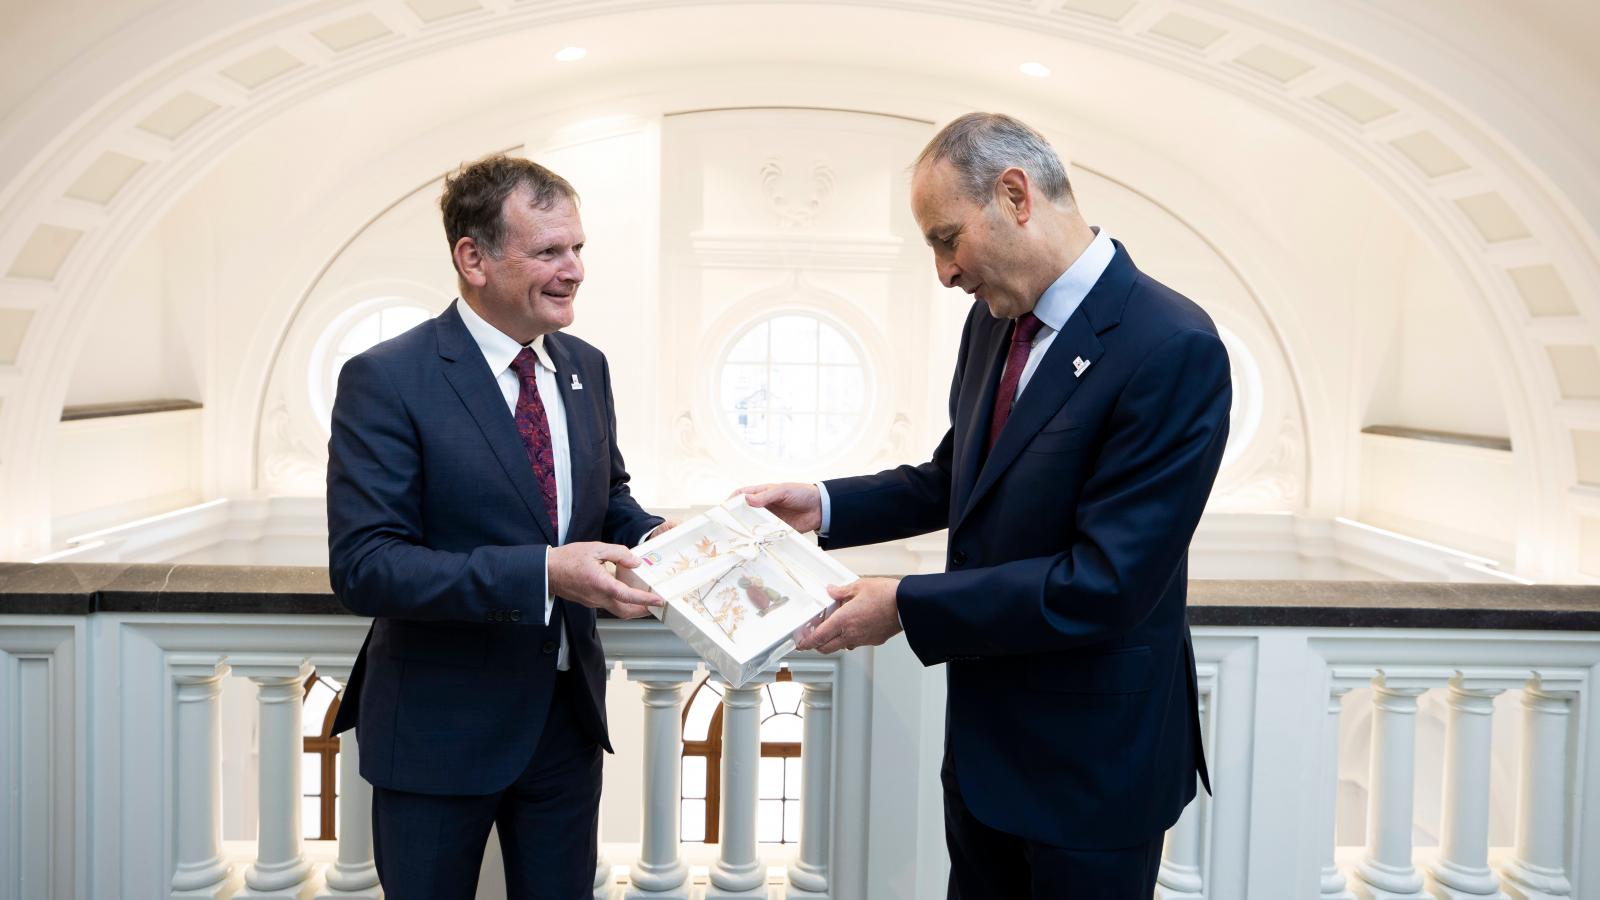 Chairperson of LauraLynn Children’s Hospice Niall McHugh (left) is pictured presenting a gift hand made in the hospice to Taoiseach Micheál Martin 